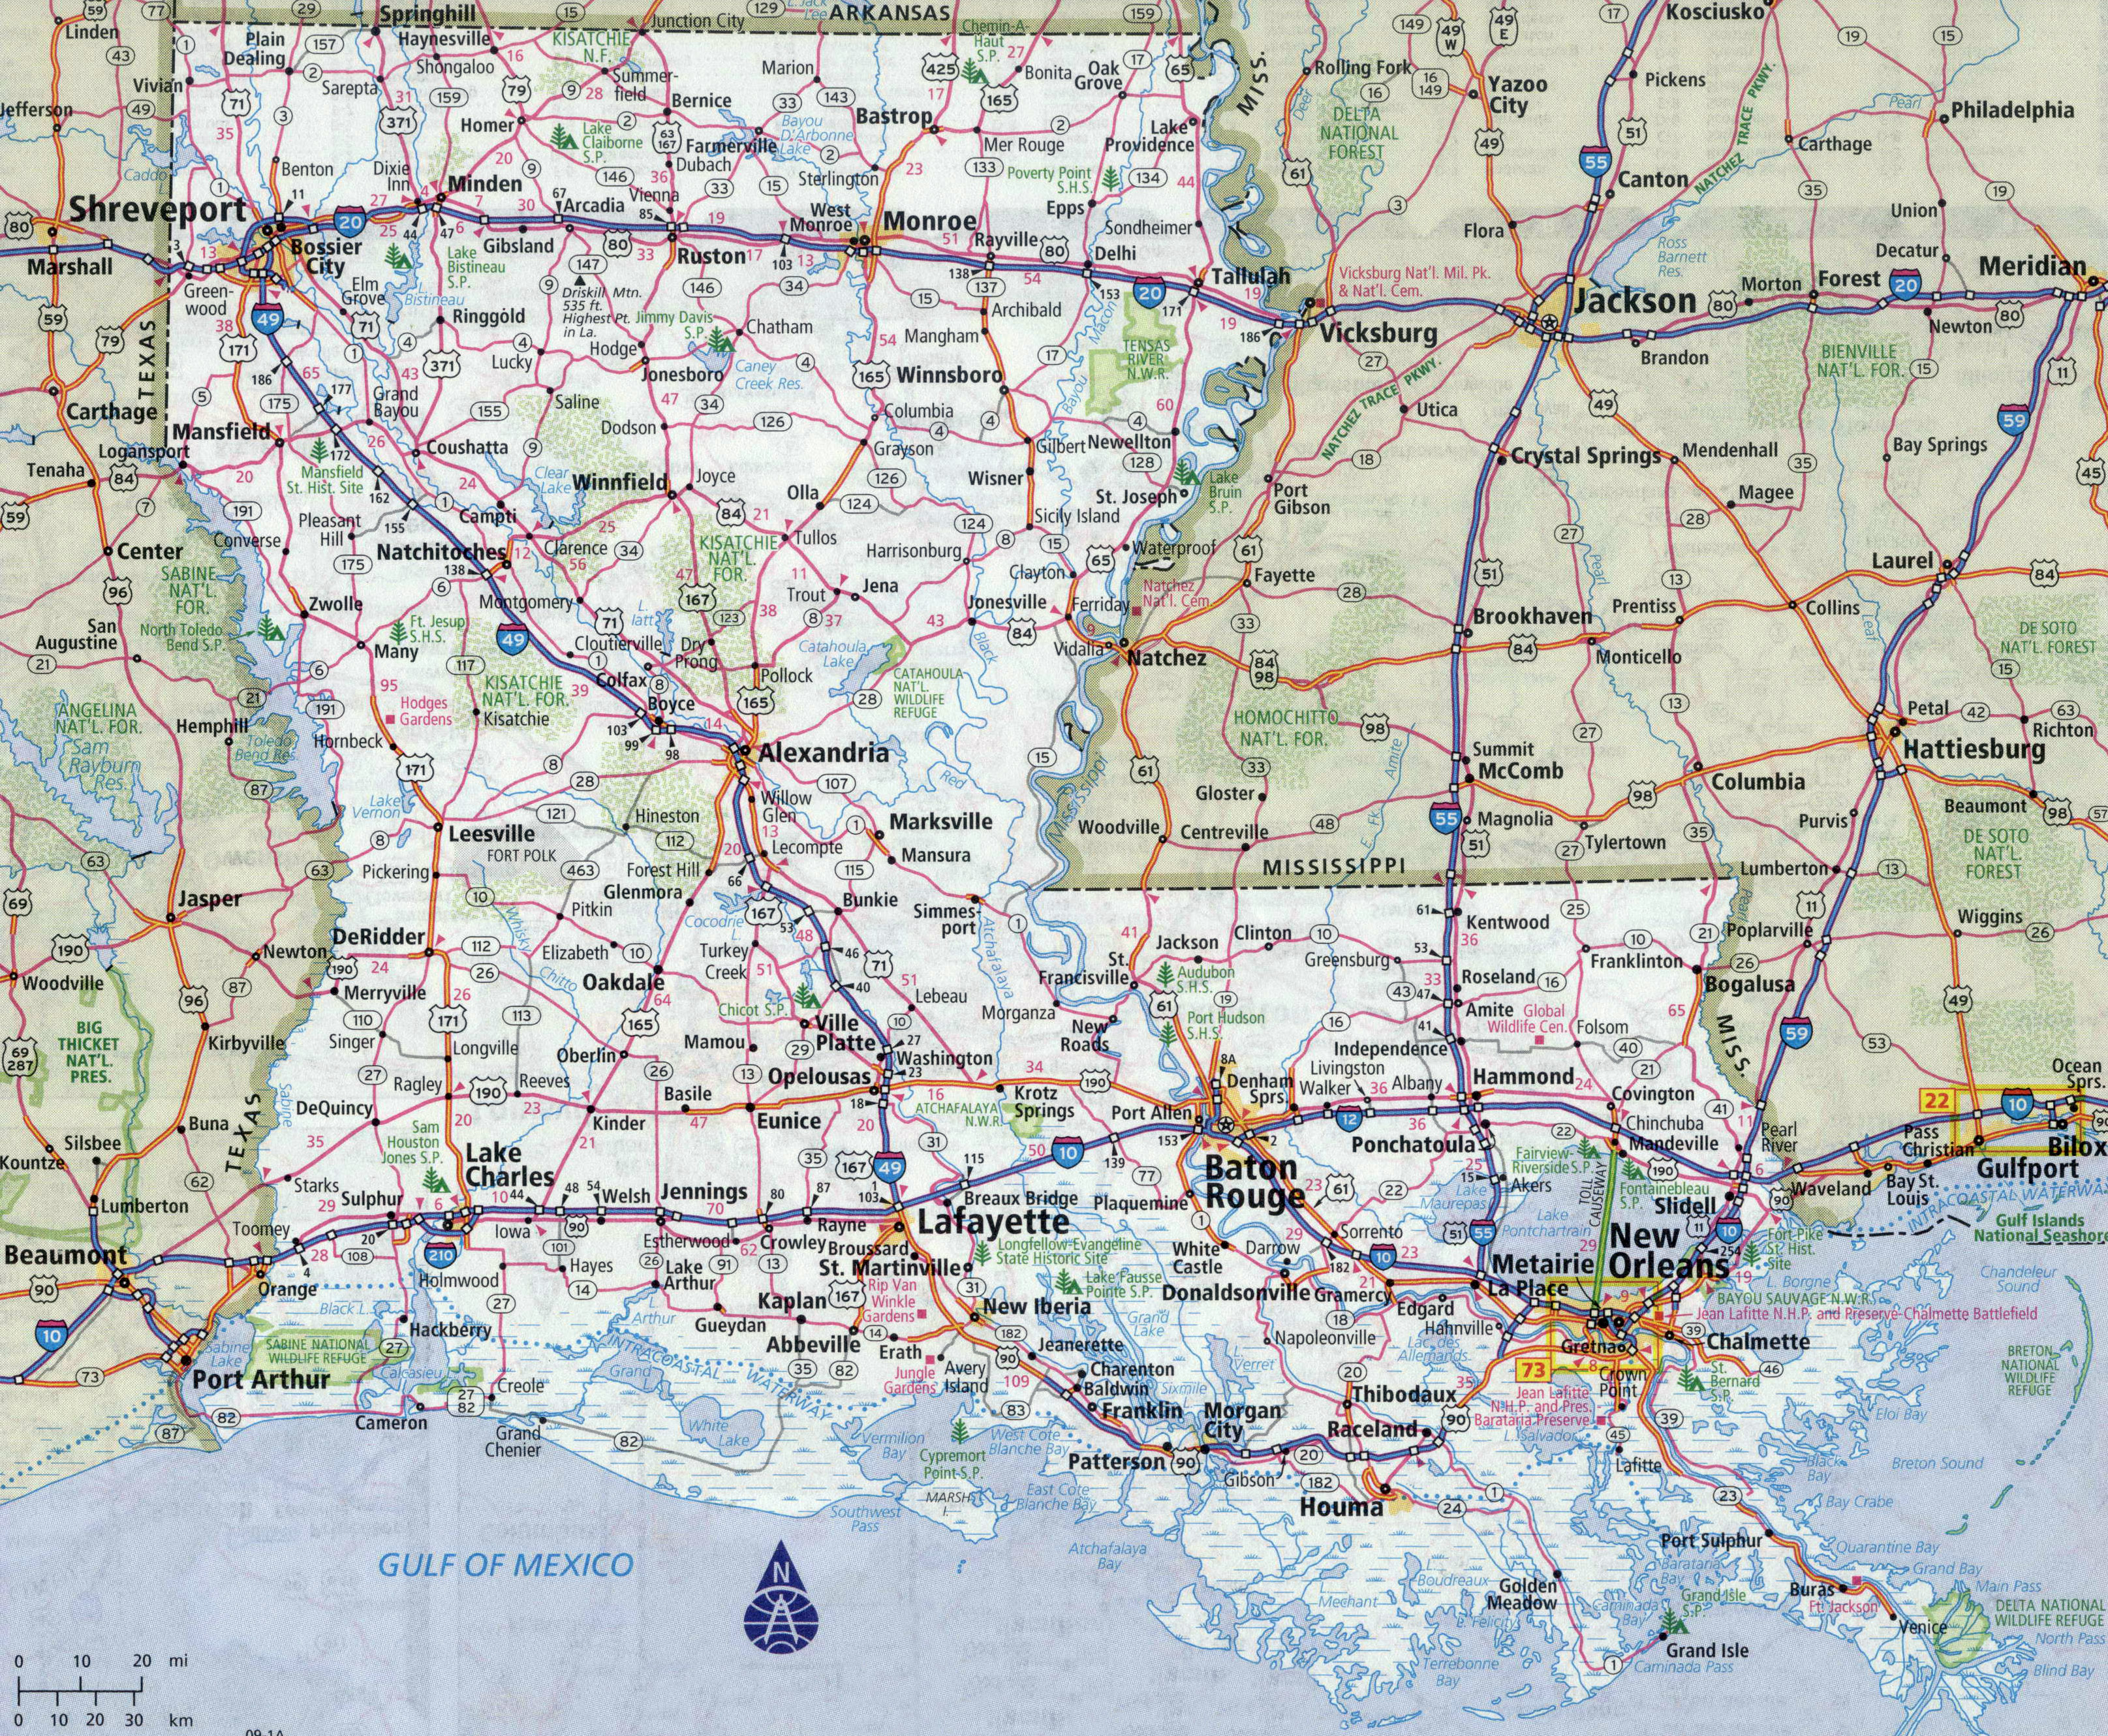 Large Detailed Roads And Highways Map Of Louisiana State With All